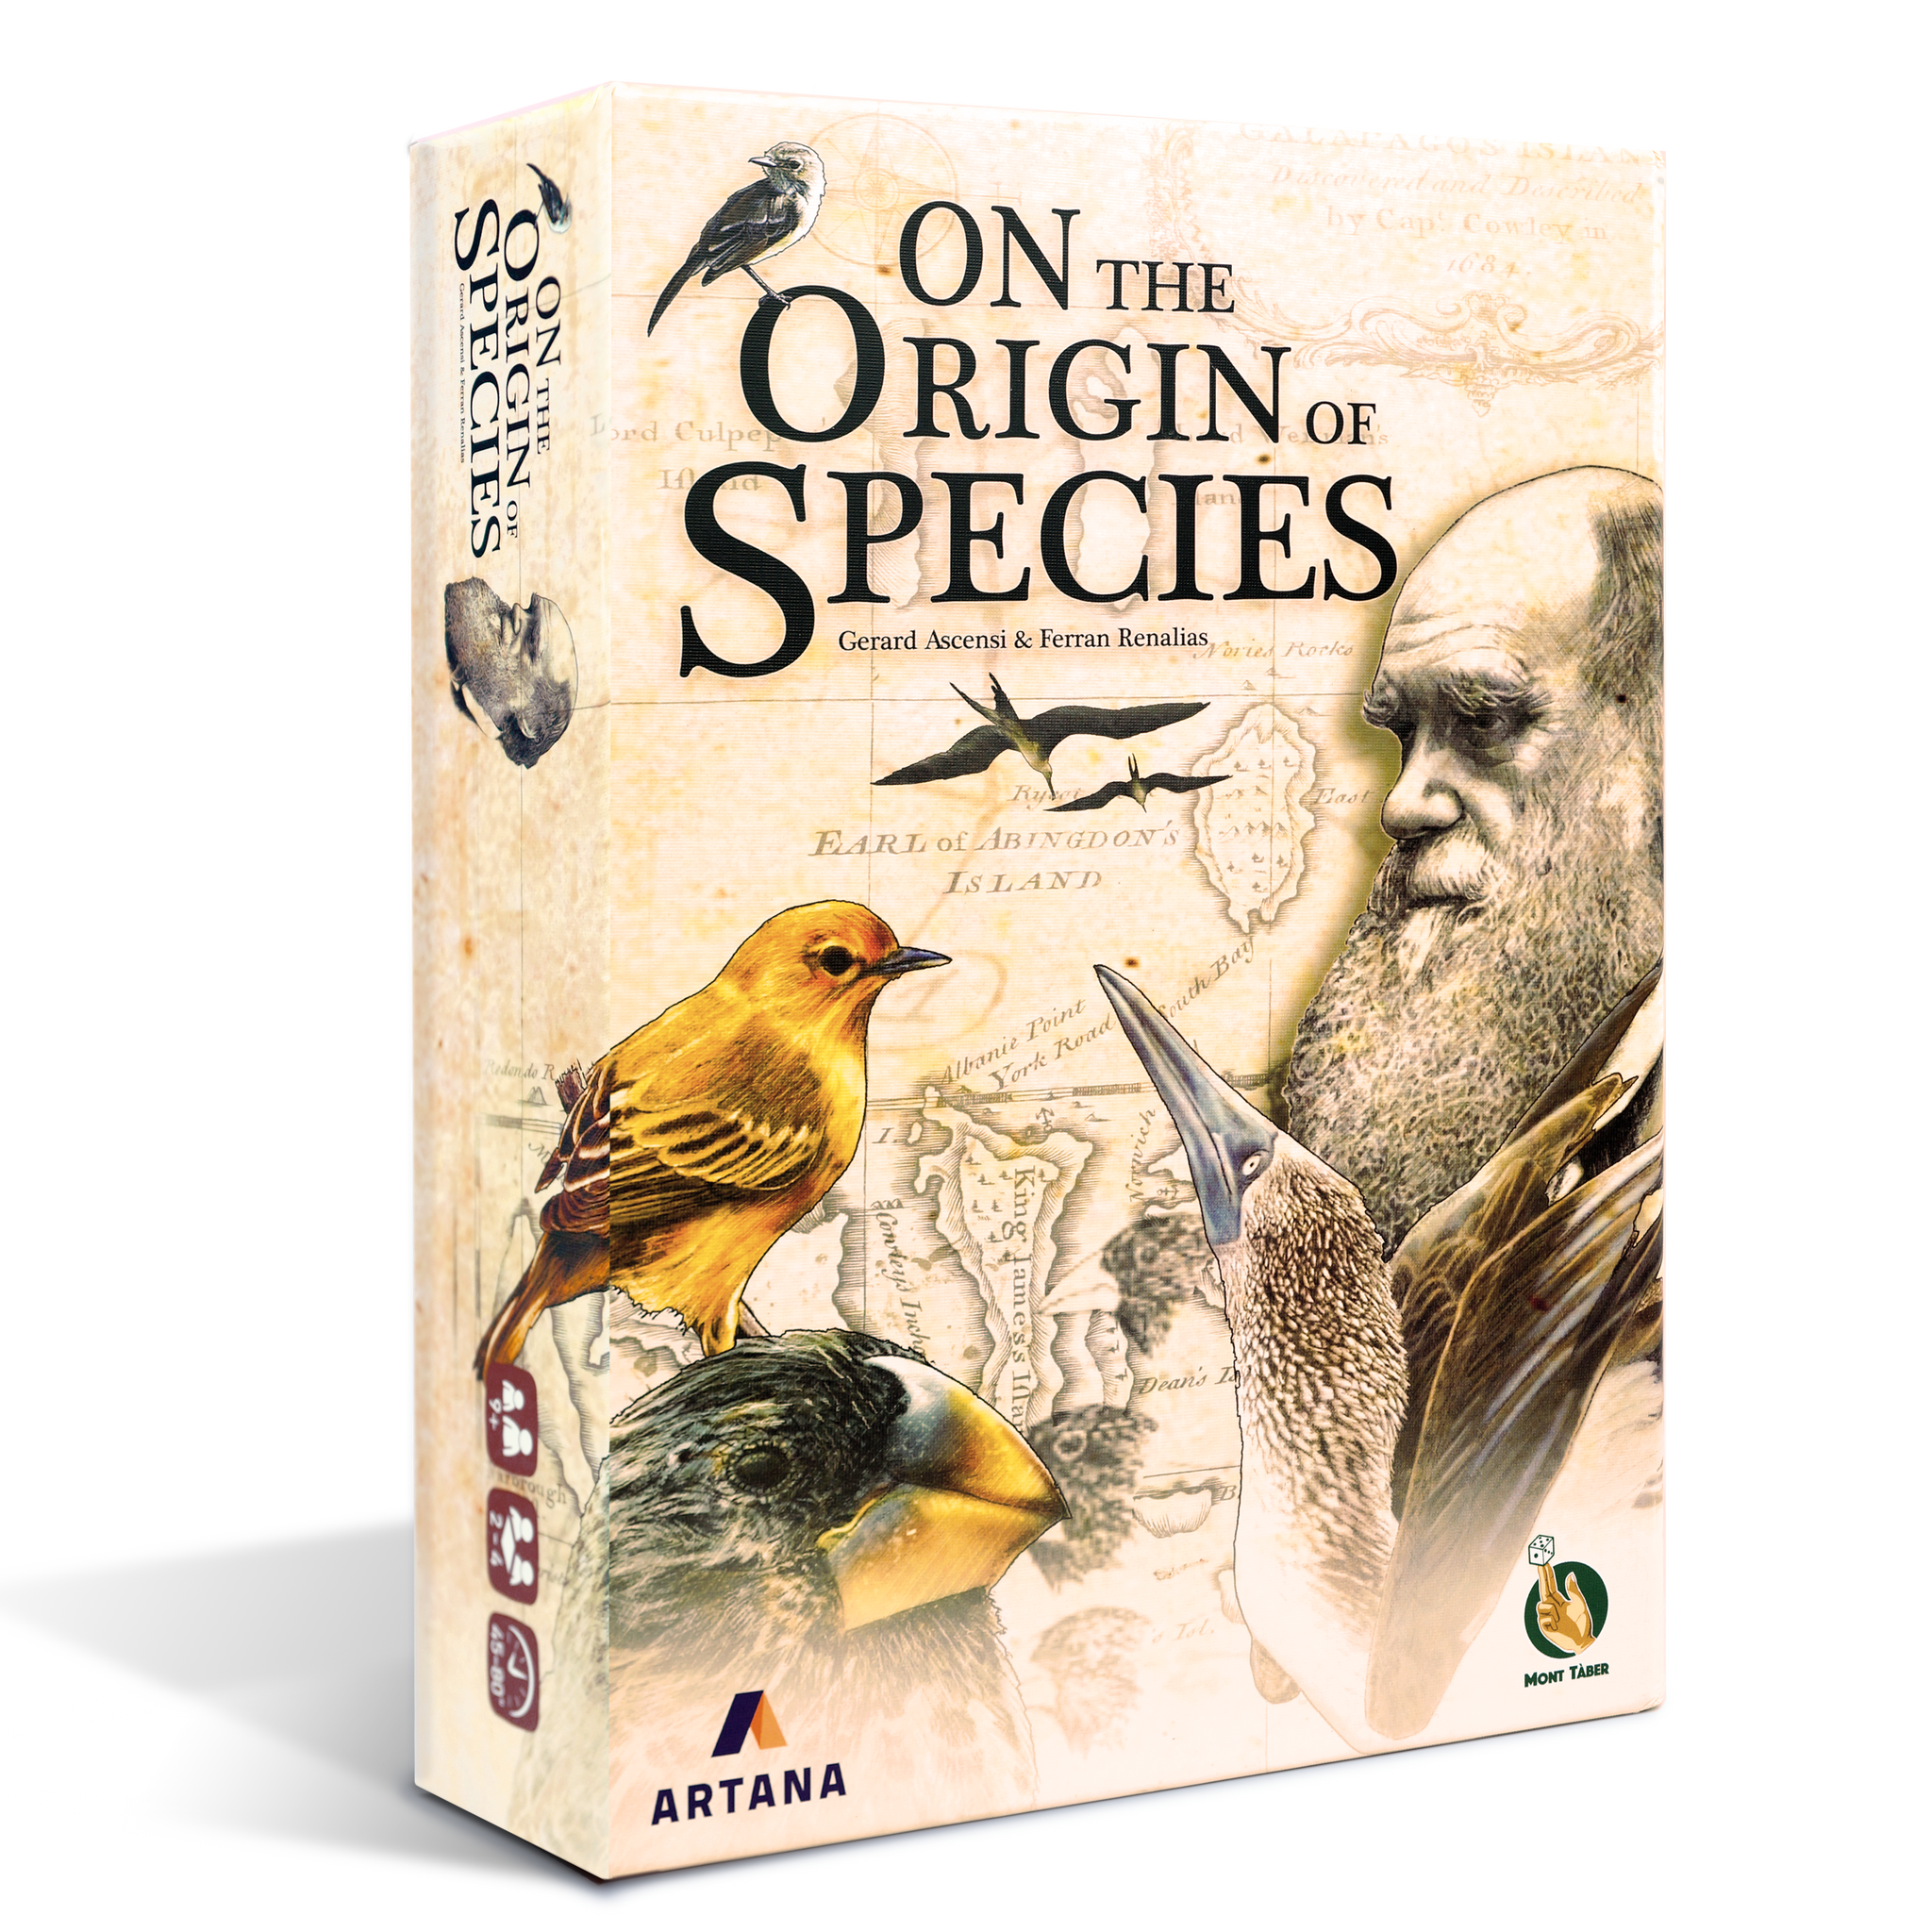  On The Origin of Species, An Evolutionary Research Board Game  by Artana Games, Charles Darwin's Trip Through the Galapagos as a  Strategic Science Board Game for Kids and Families